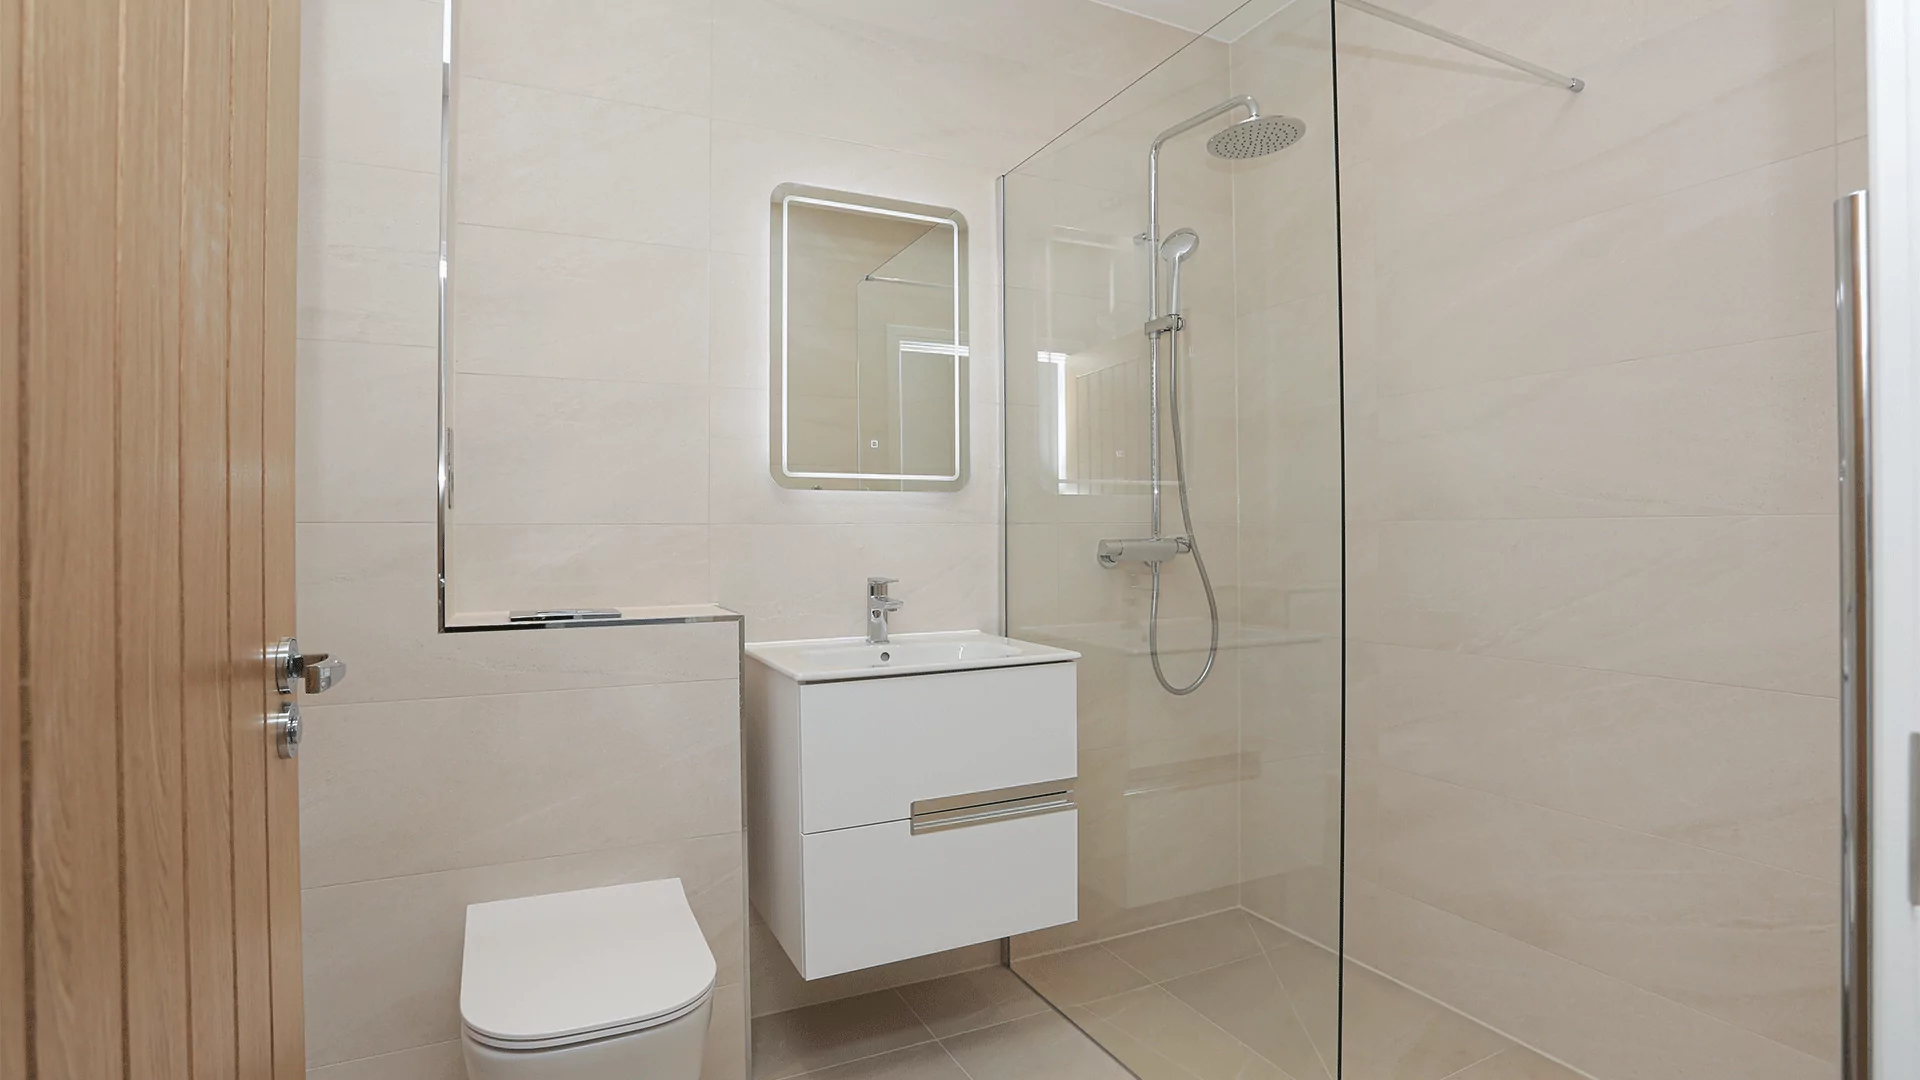 Tiled bathroom with shower, toilet and sink basin with mirror at Miller's Meadow.